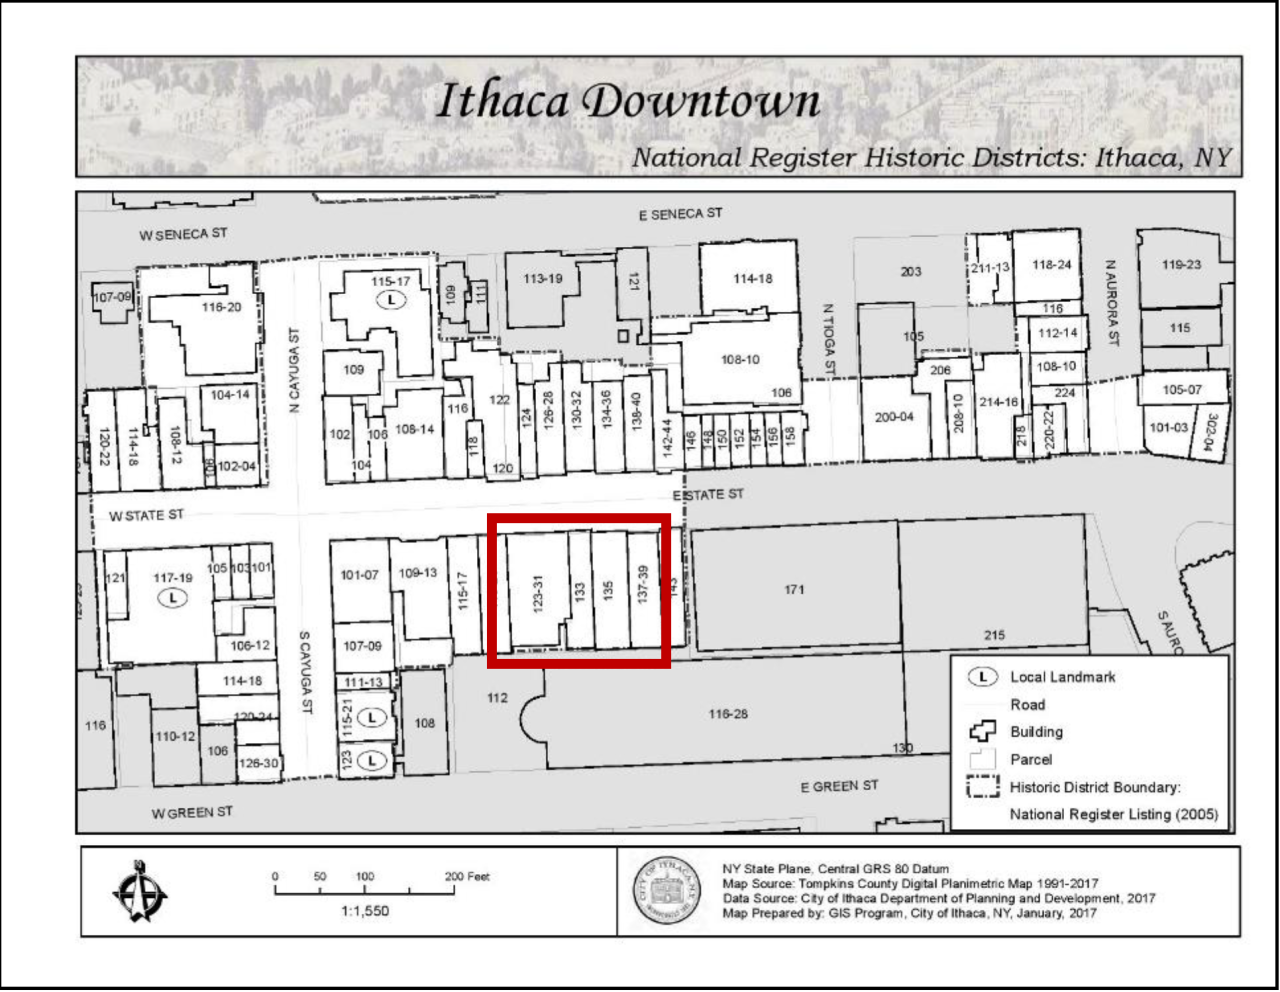 Sage Block buildings located on downtown Ithaca map.